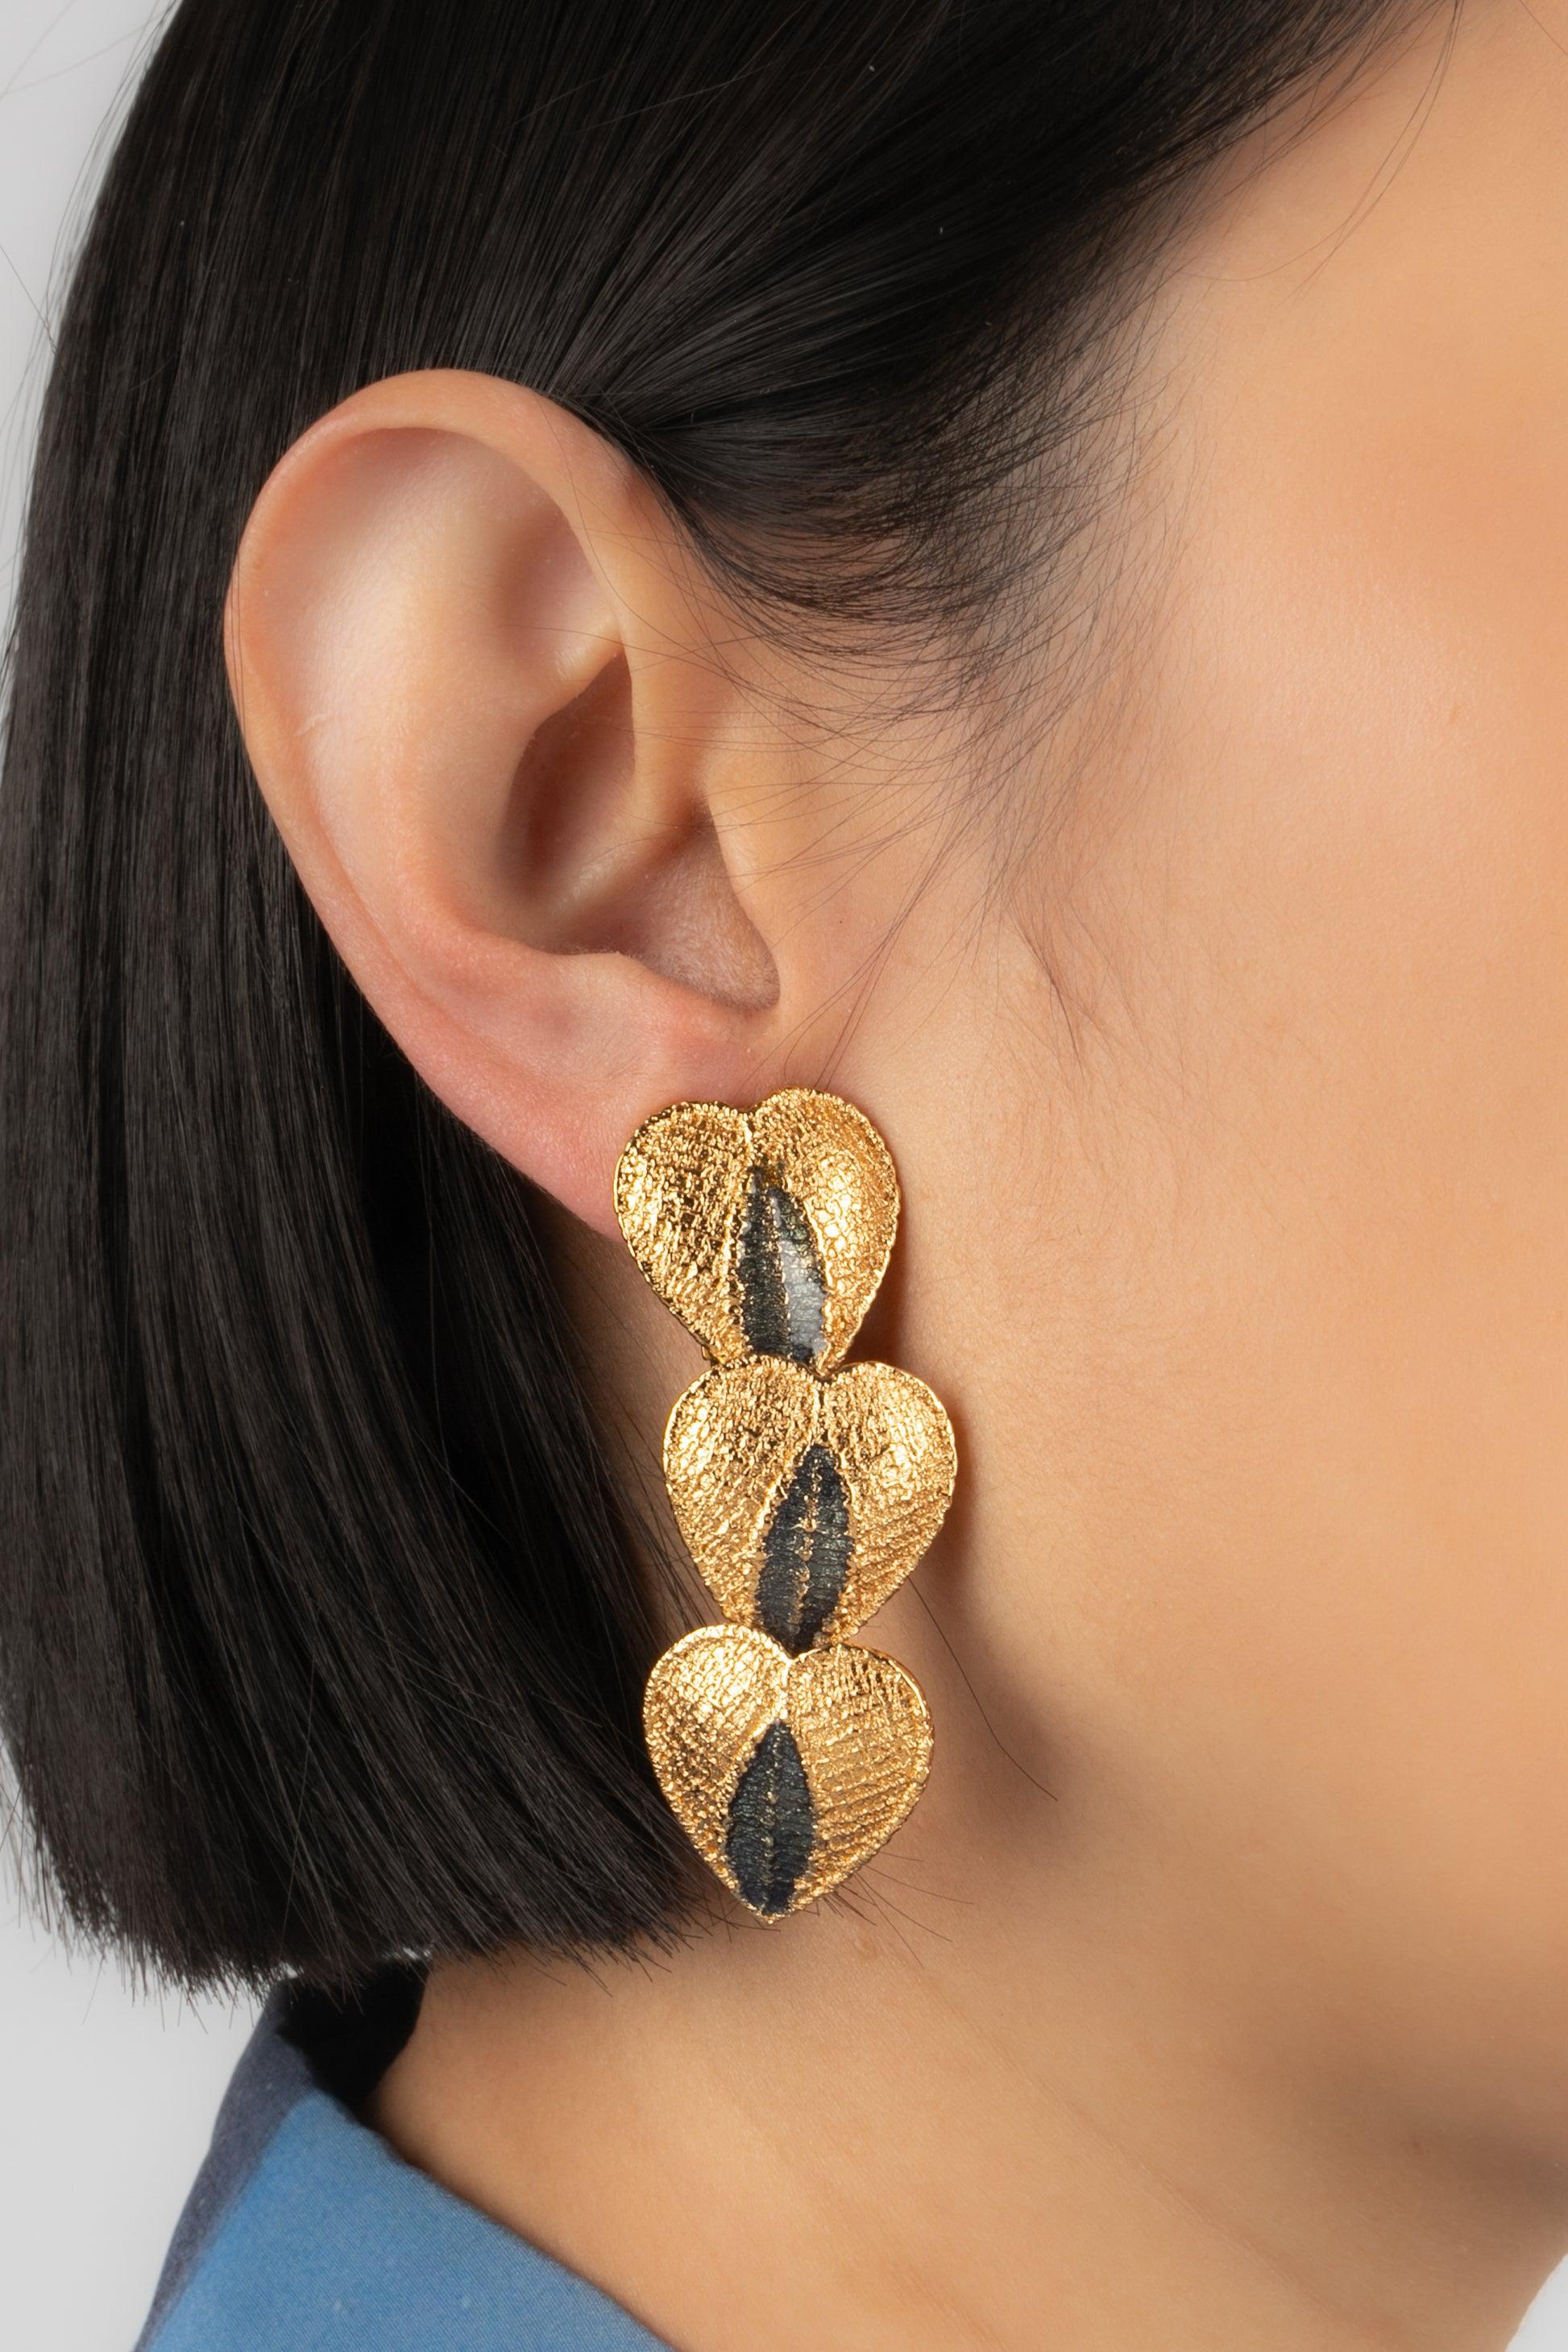 Yves Saint Laurent - (Made in France) Articulated golden metal clip-on earrings enameled with blue. Jewelry from the middle of the 1980s.

Additional information:
Condition: Very good condition
Dimensions: Length: 6 cm
Period: 20th Century

Seller